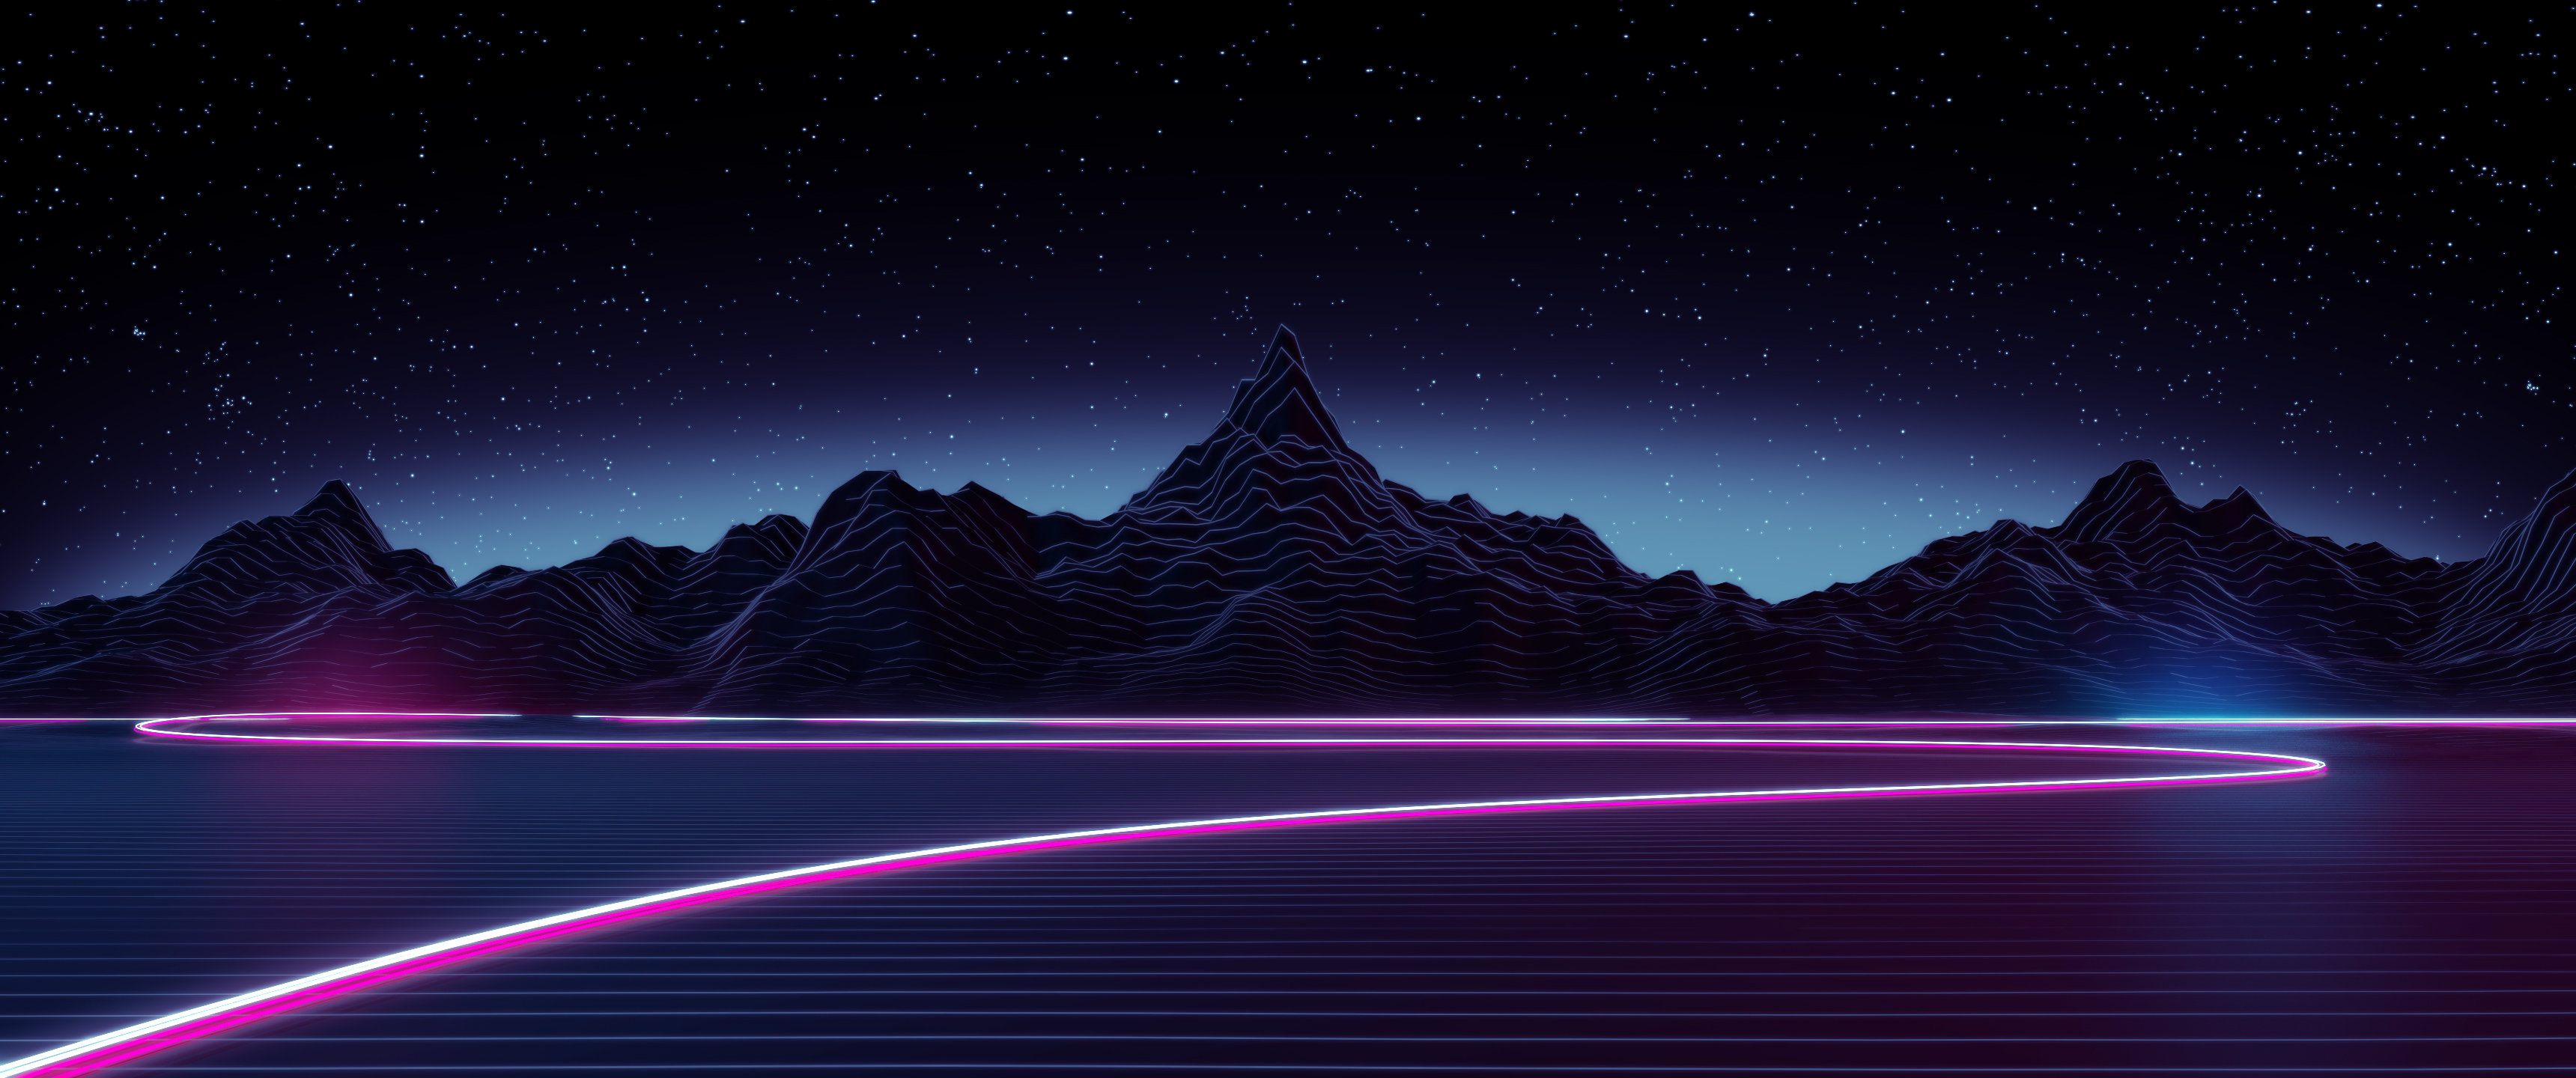 My Favorite Outrun Styled Wallpaper